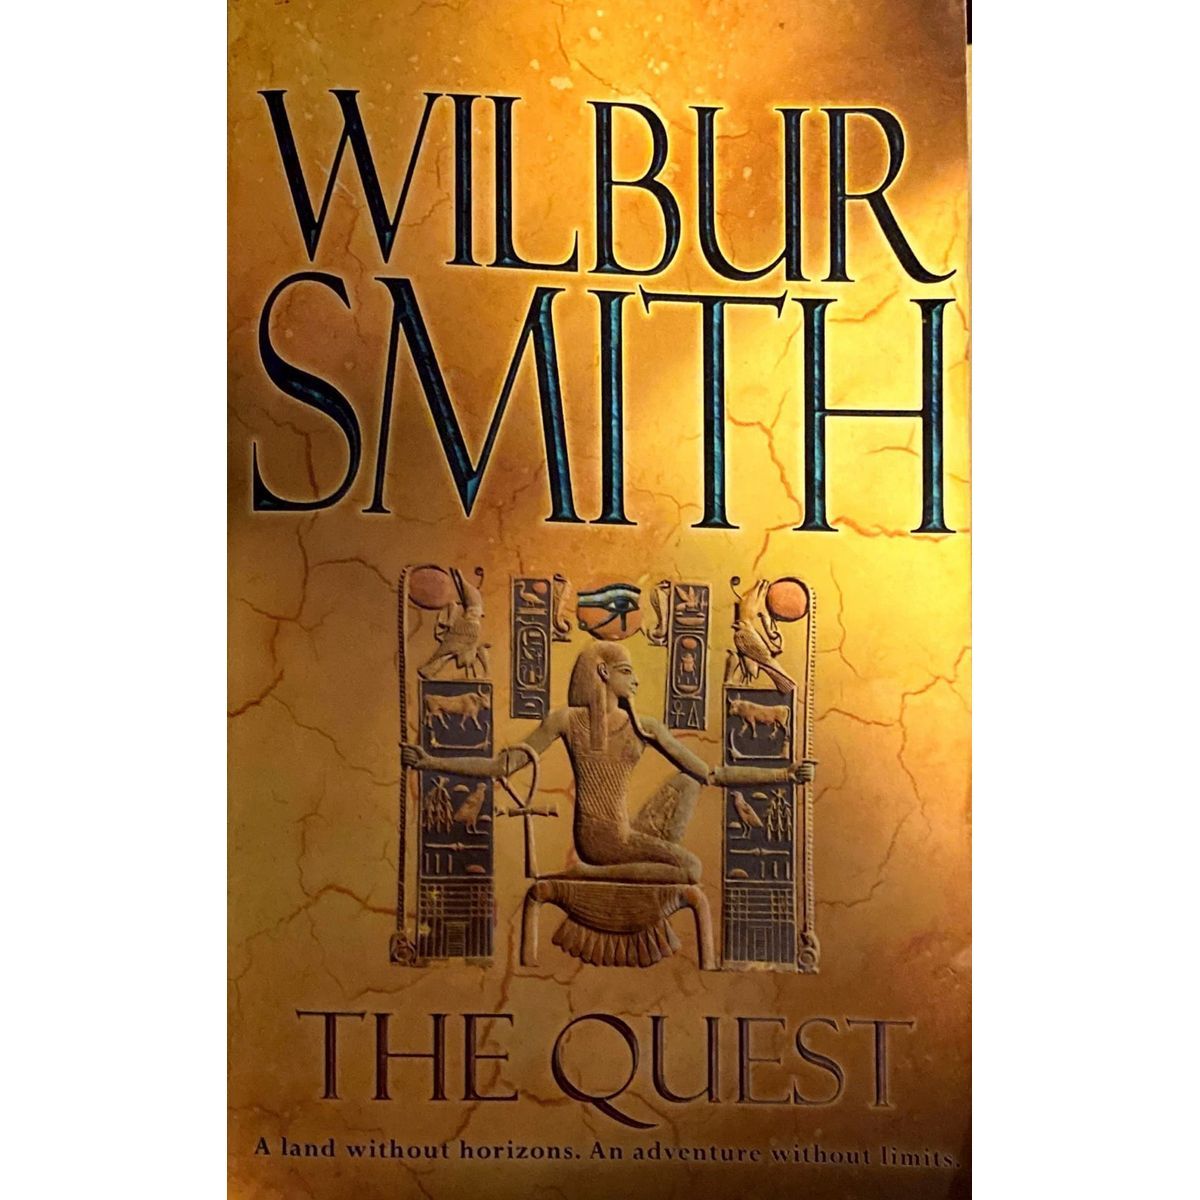 ISBN: 9780330456012 / 0330456016 - The Quest by Wilbur Smith [2008]